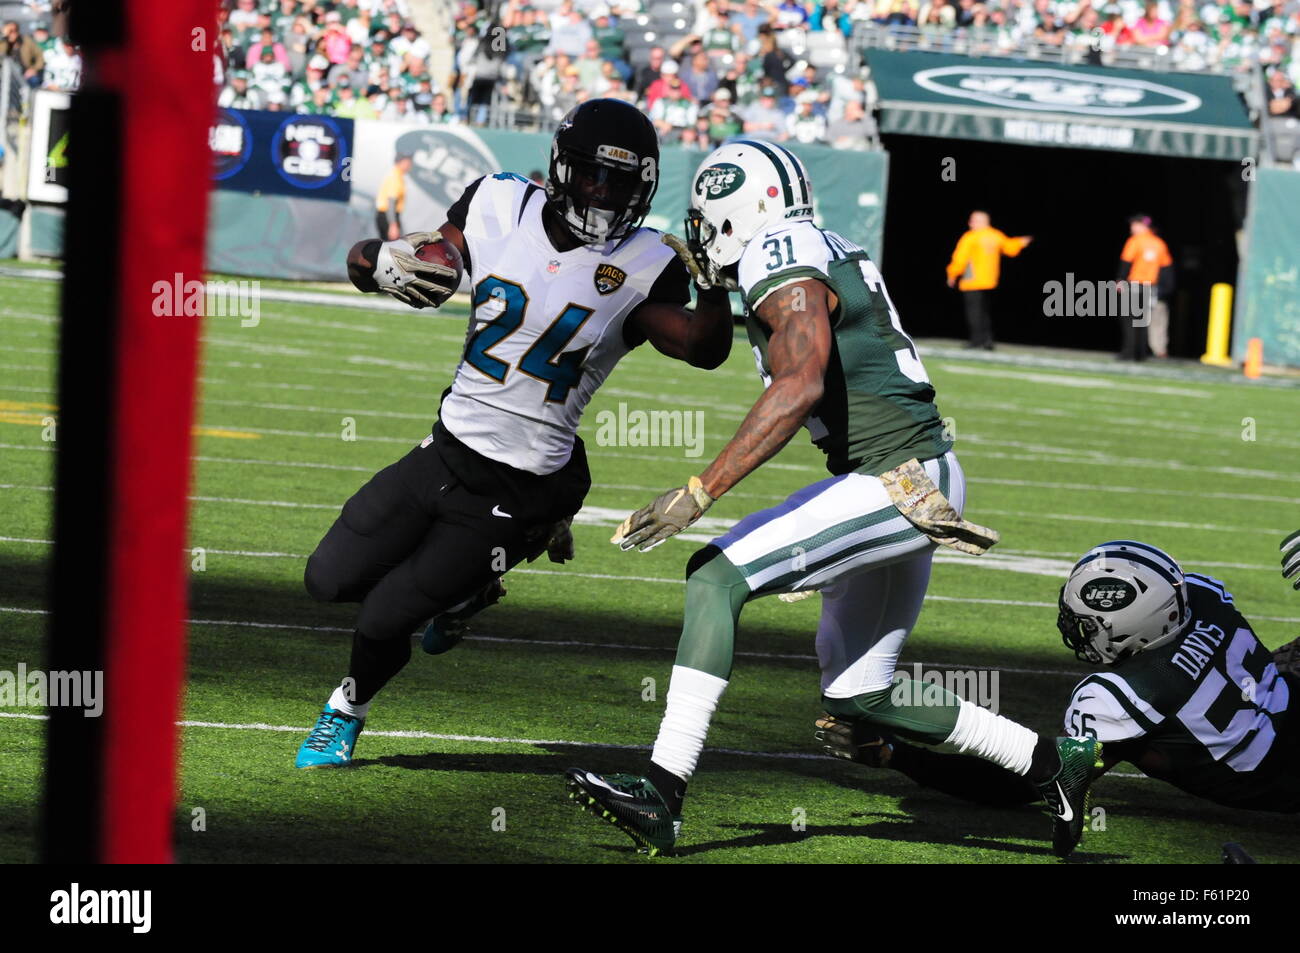 East Rutherford, New Jersey, USA. 8th Nov, 2015. -Jaguars corner back (41) NICK MARSHALL in action between the Jacksonville Jaguars and the New York Jets at MetLife Stadium in East Rutherford, New Jersey. © Jeffrey Geller/ZUMA Wire/Alamy Live News Stock Photo